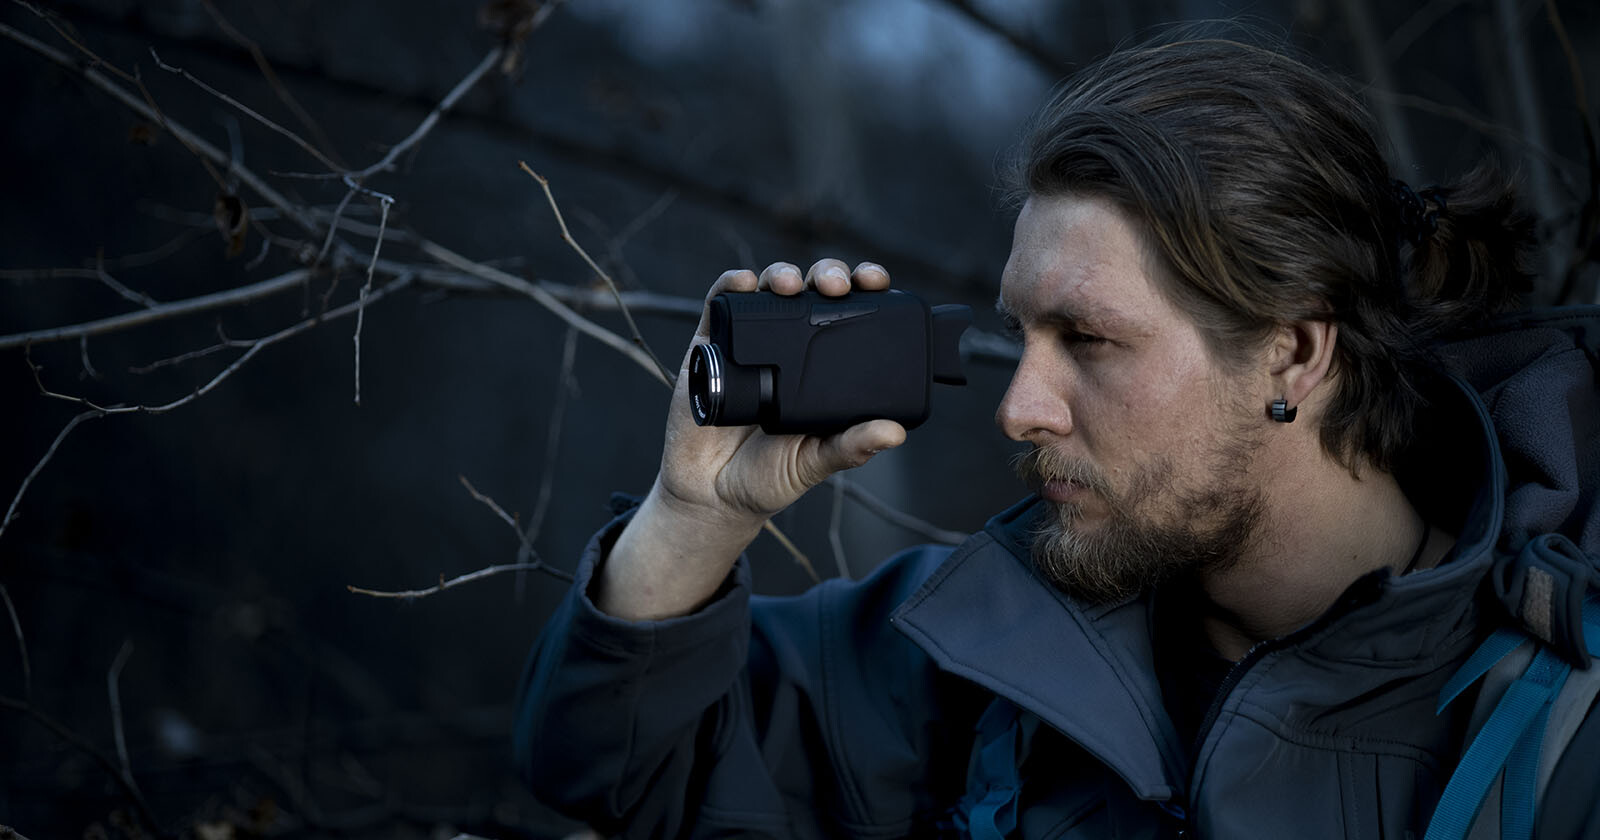 The Duovox Ultra Monocular Camera Can See in Basically Total Darkness